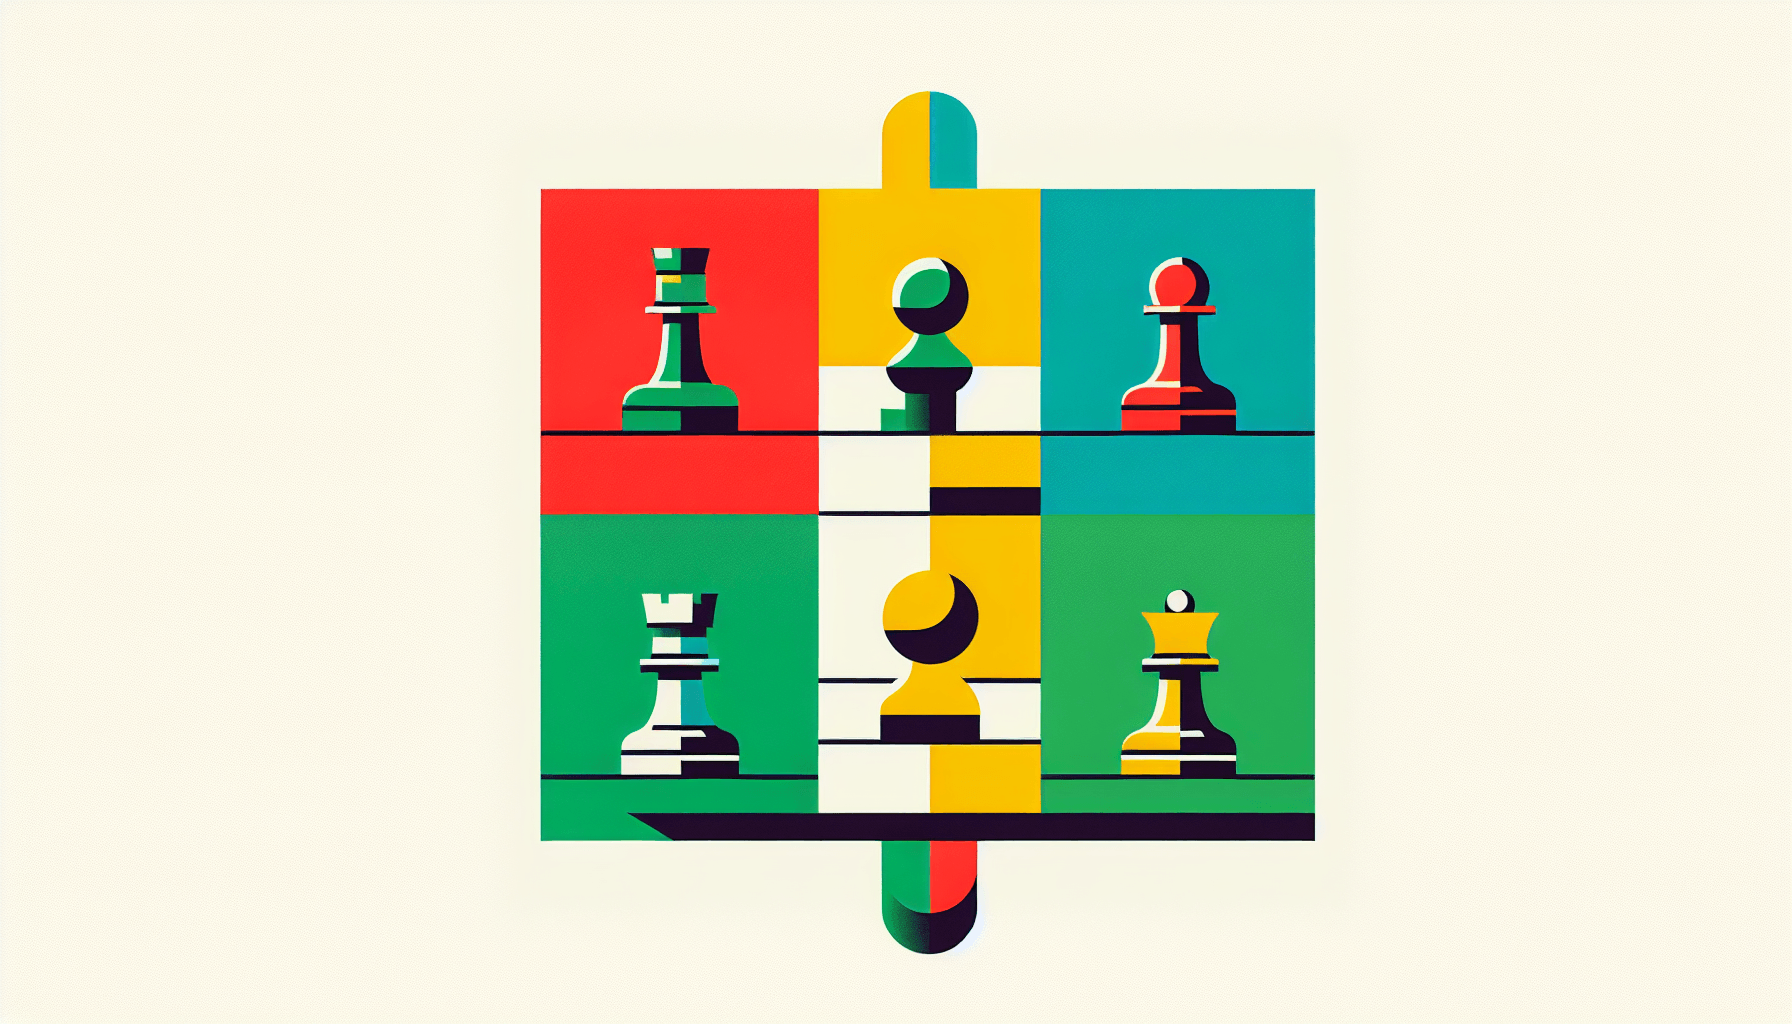 Chessboard in flat illustration style and white background, red #f47574, green #88c7a8, yellow #fcc44b, and blue #645bc8 colors.